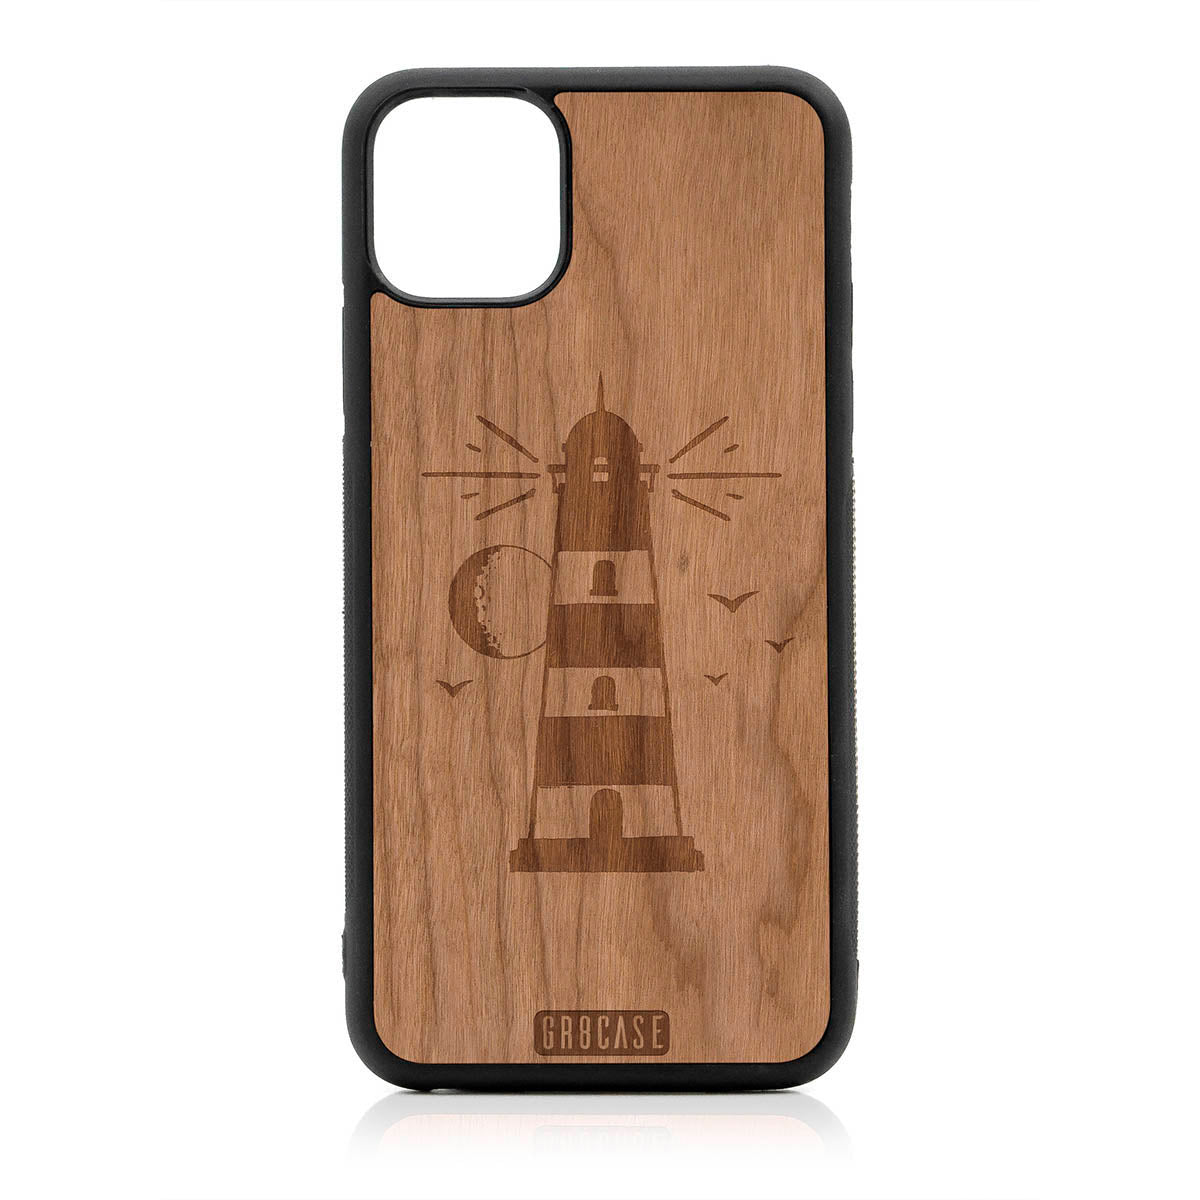 Midnight Lighthouse Design Wood Case For iPhone 11 Pro Max